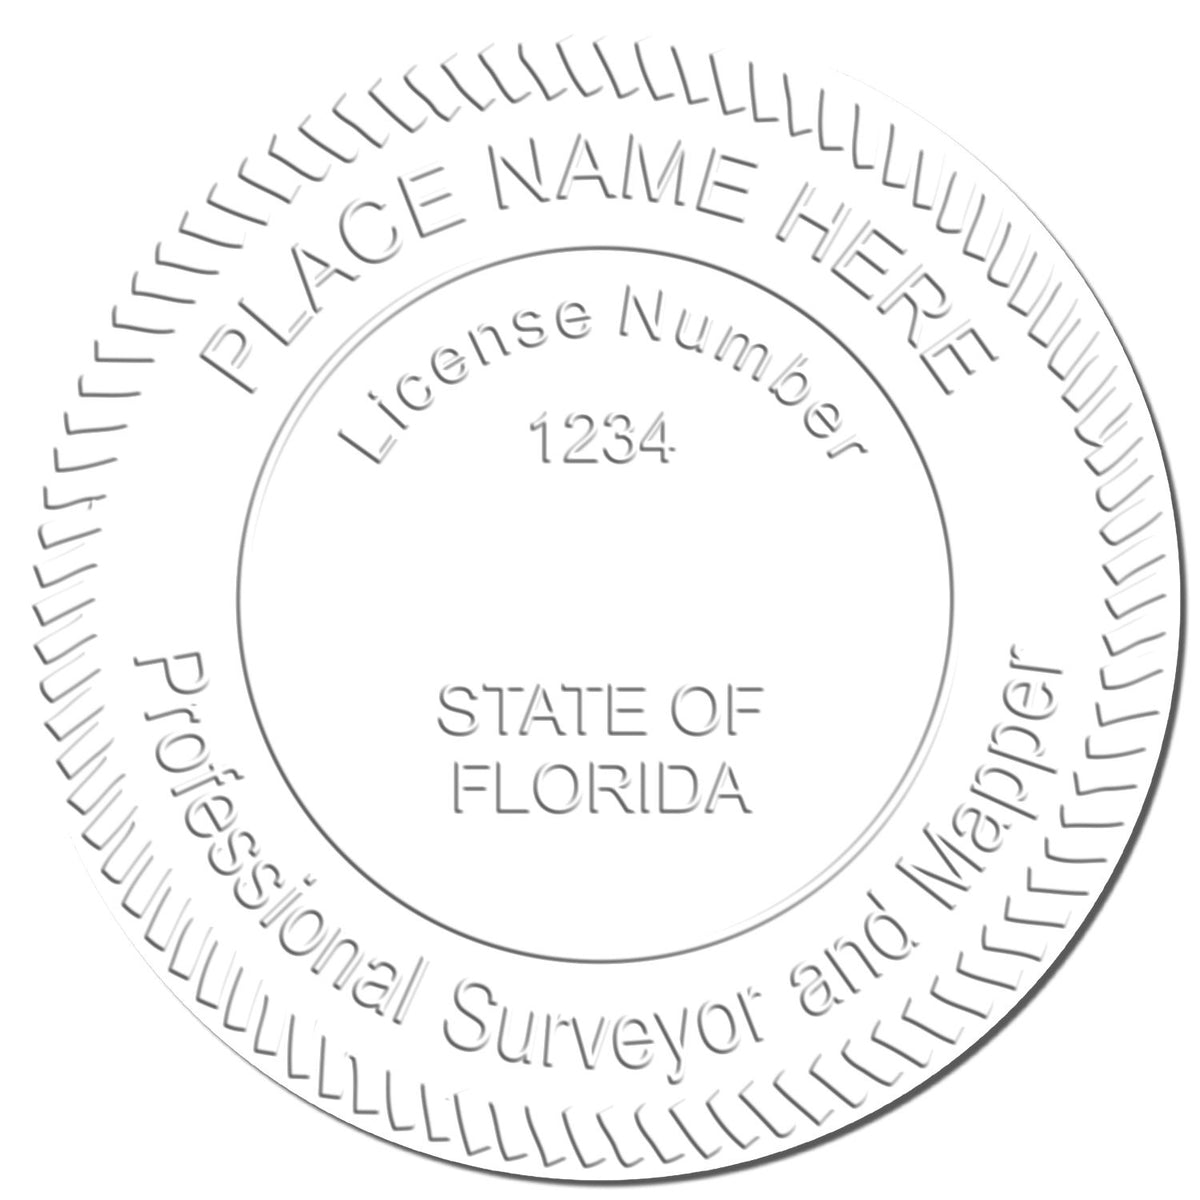 This paper is stamped with a sample imprint of the Gift Florida Land Surveyor Seal, signifying its quality and reliability.